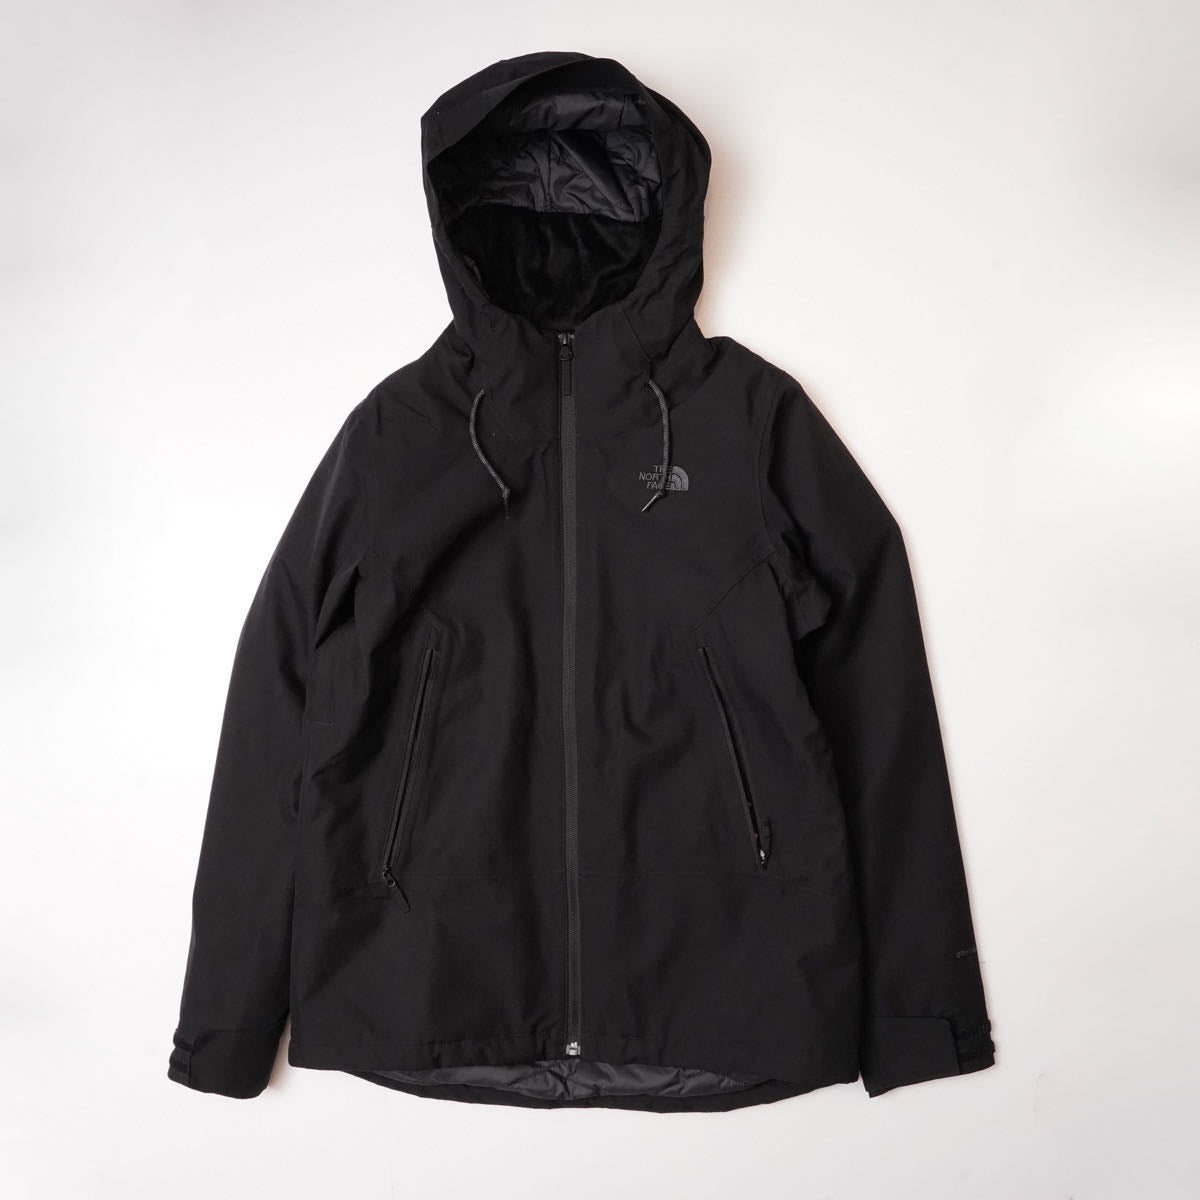 【WOMEN】North Face Insulated Jacket＆Calendar＆PayPay